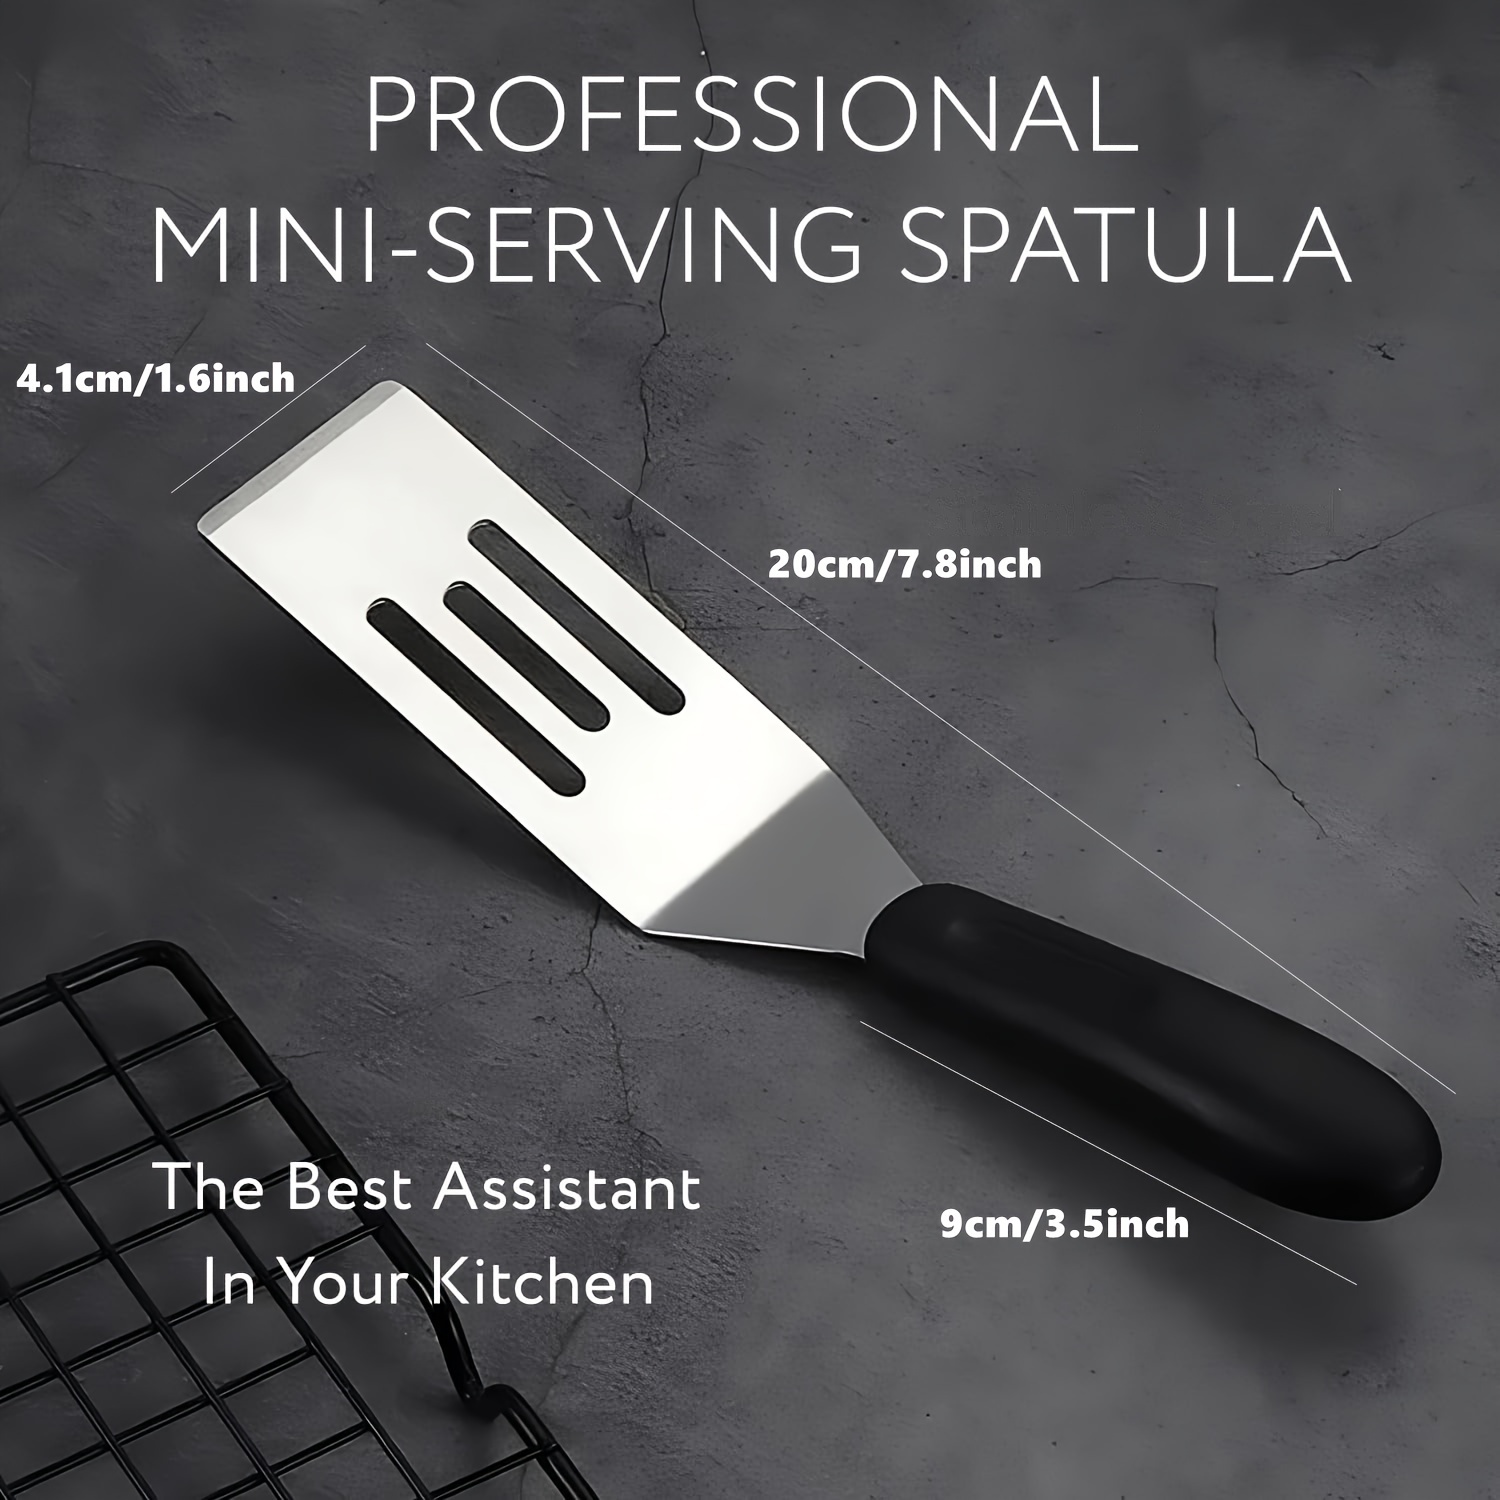 Pampered Chef Mini Spatula Review